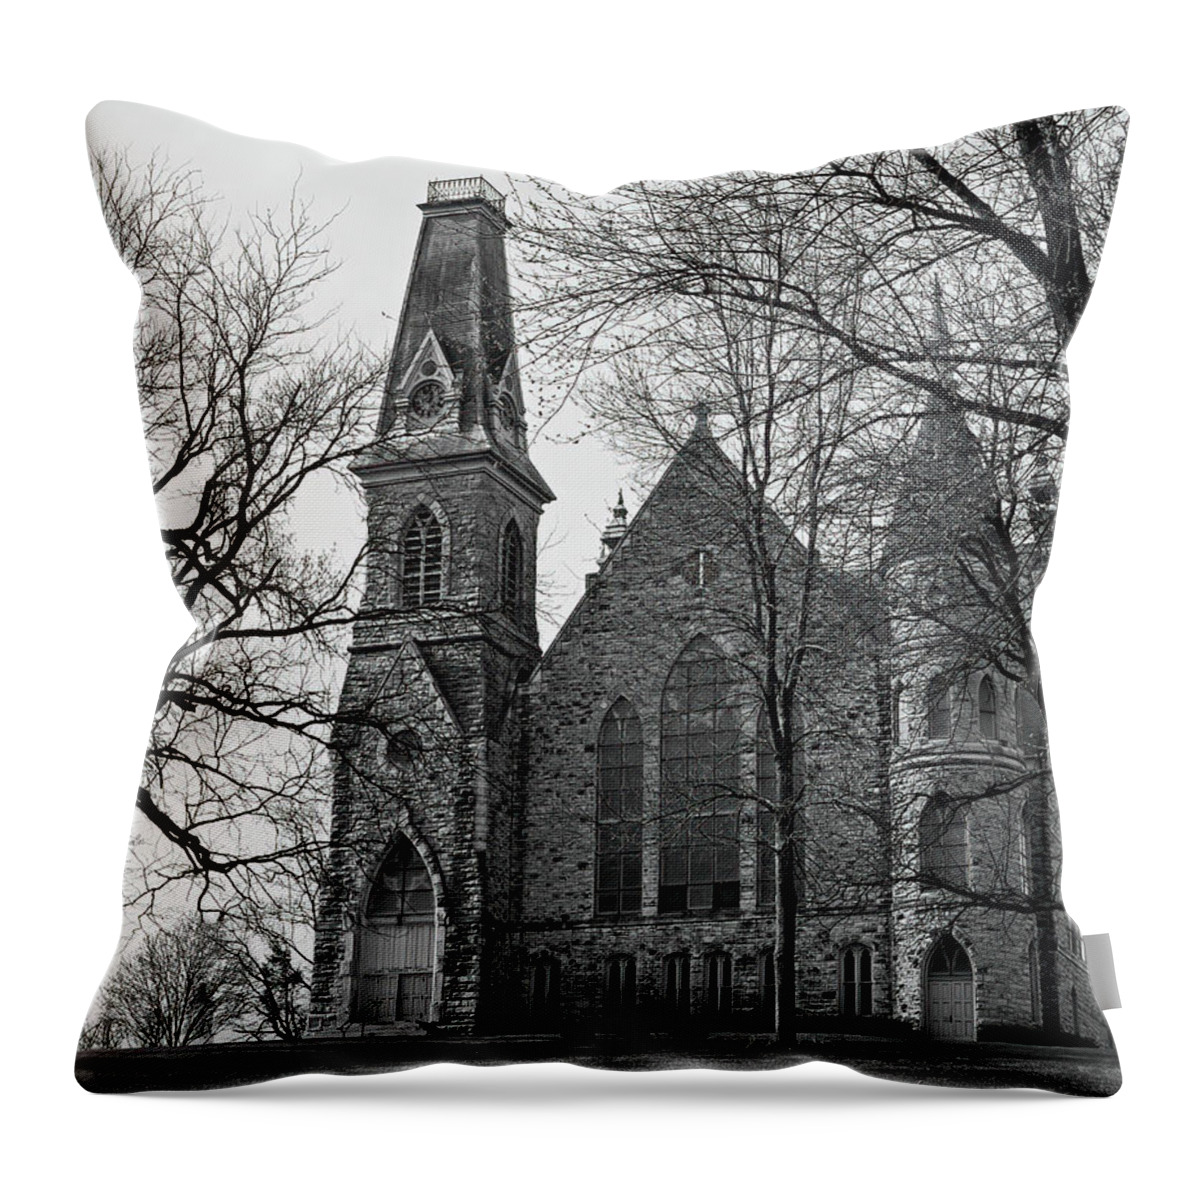 King Chapel Throw Pillow featuring the photograph King Chapel Cornell College by Lens Art Photography By Larry Trager